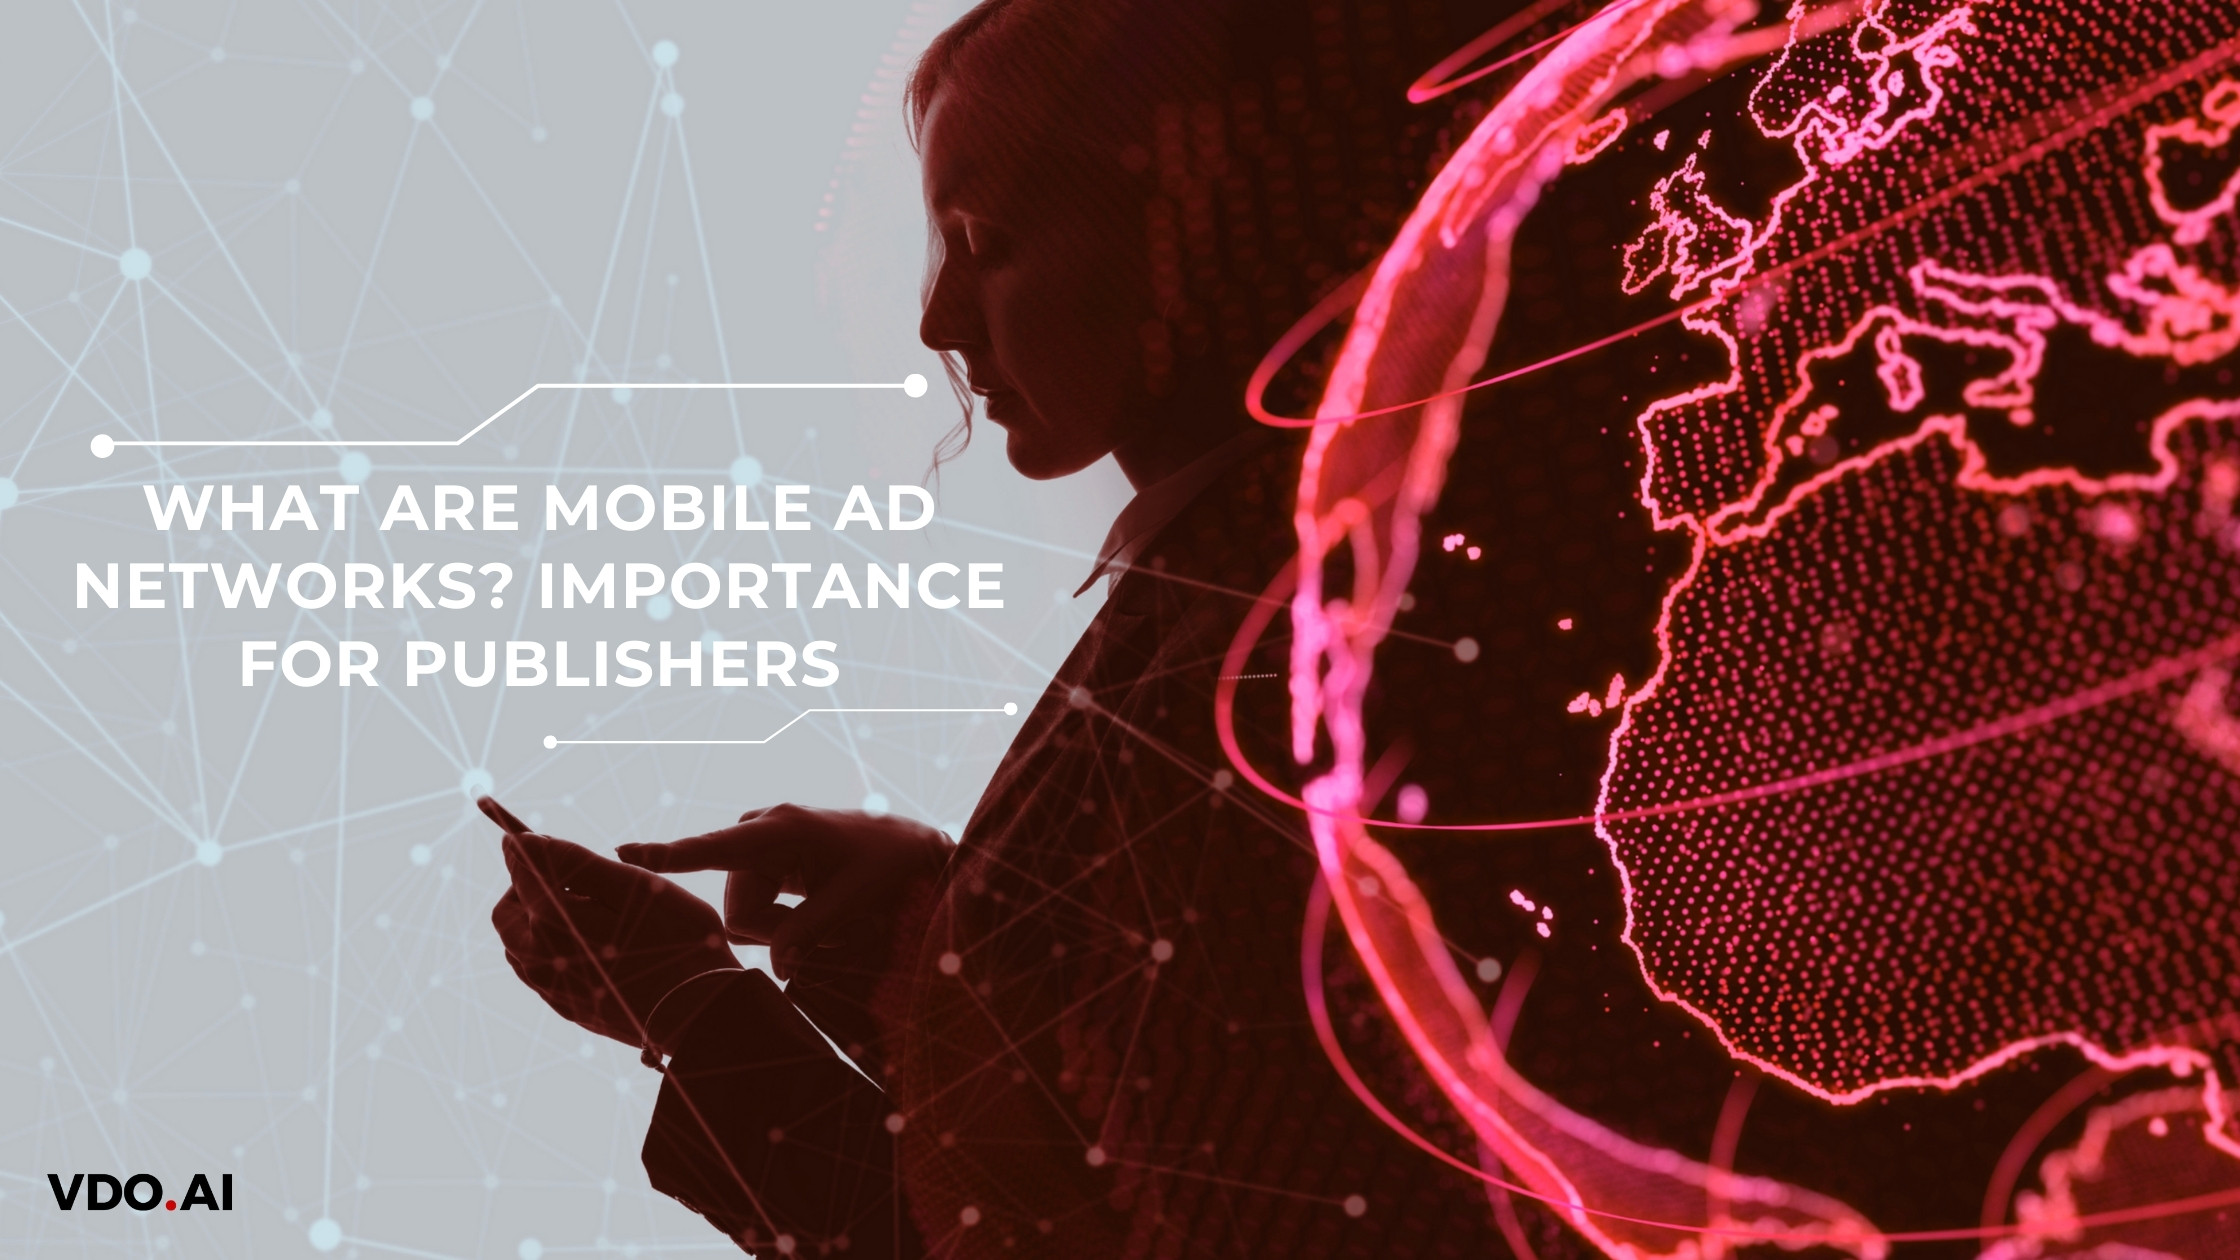 Mobile ad networks